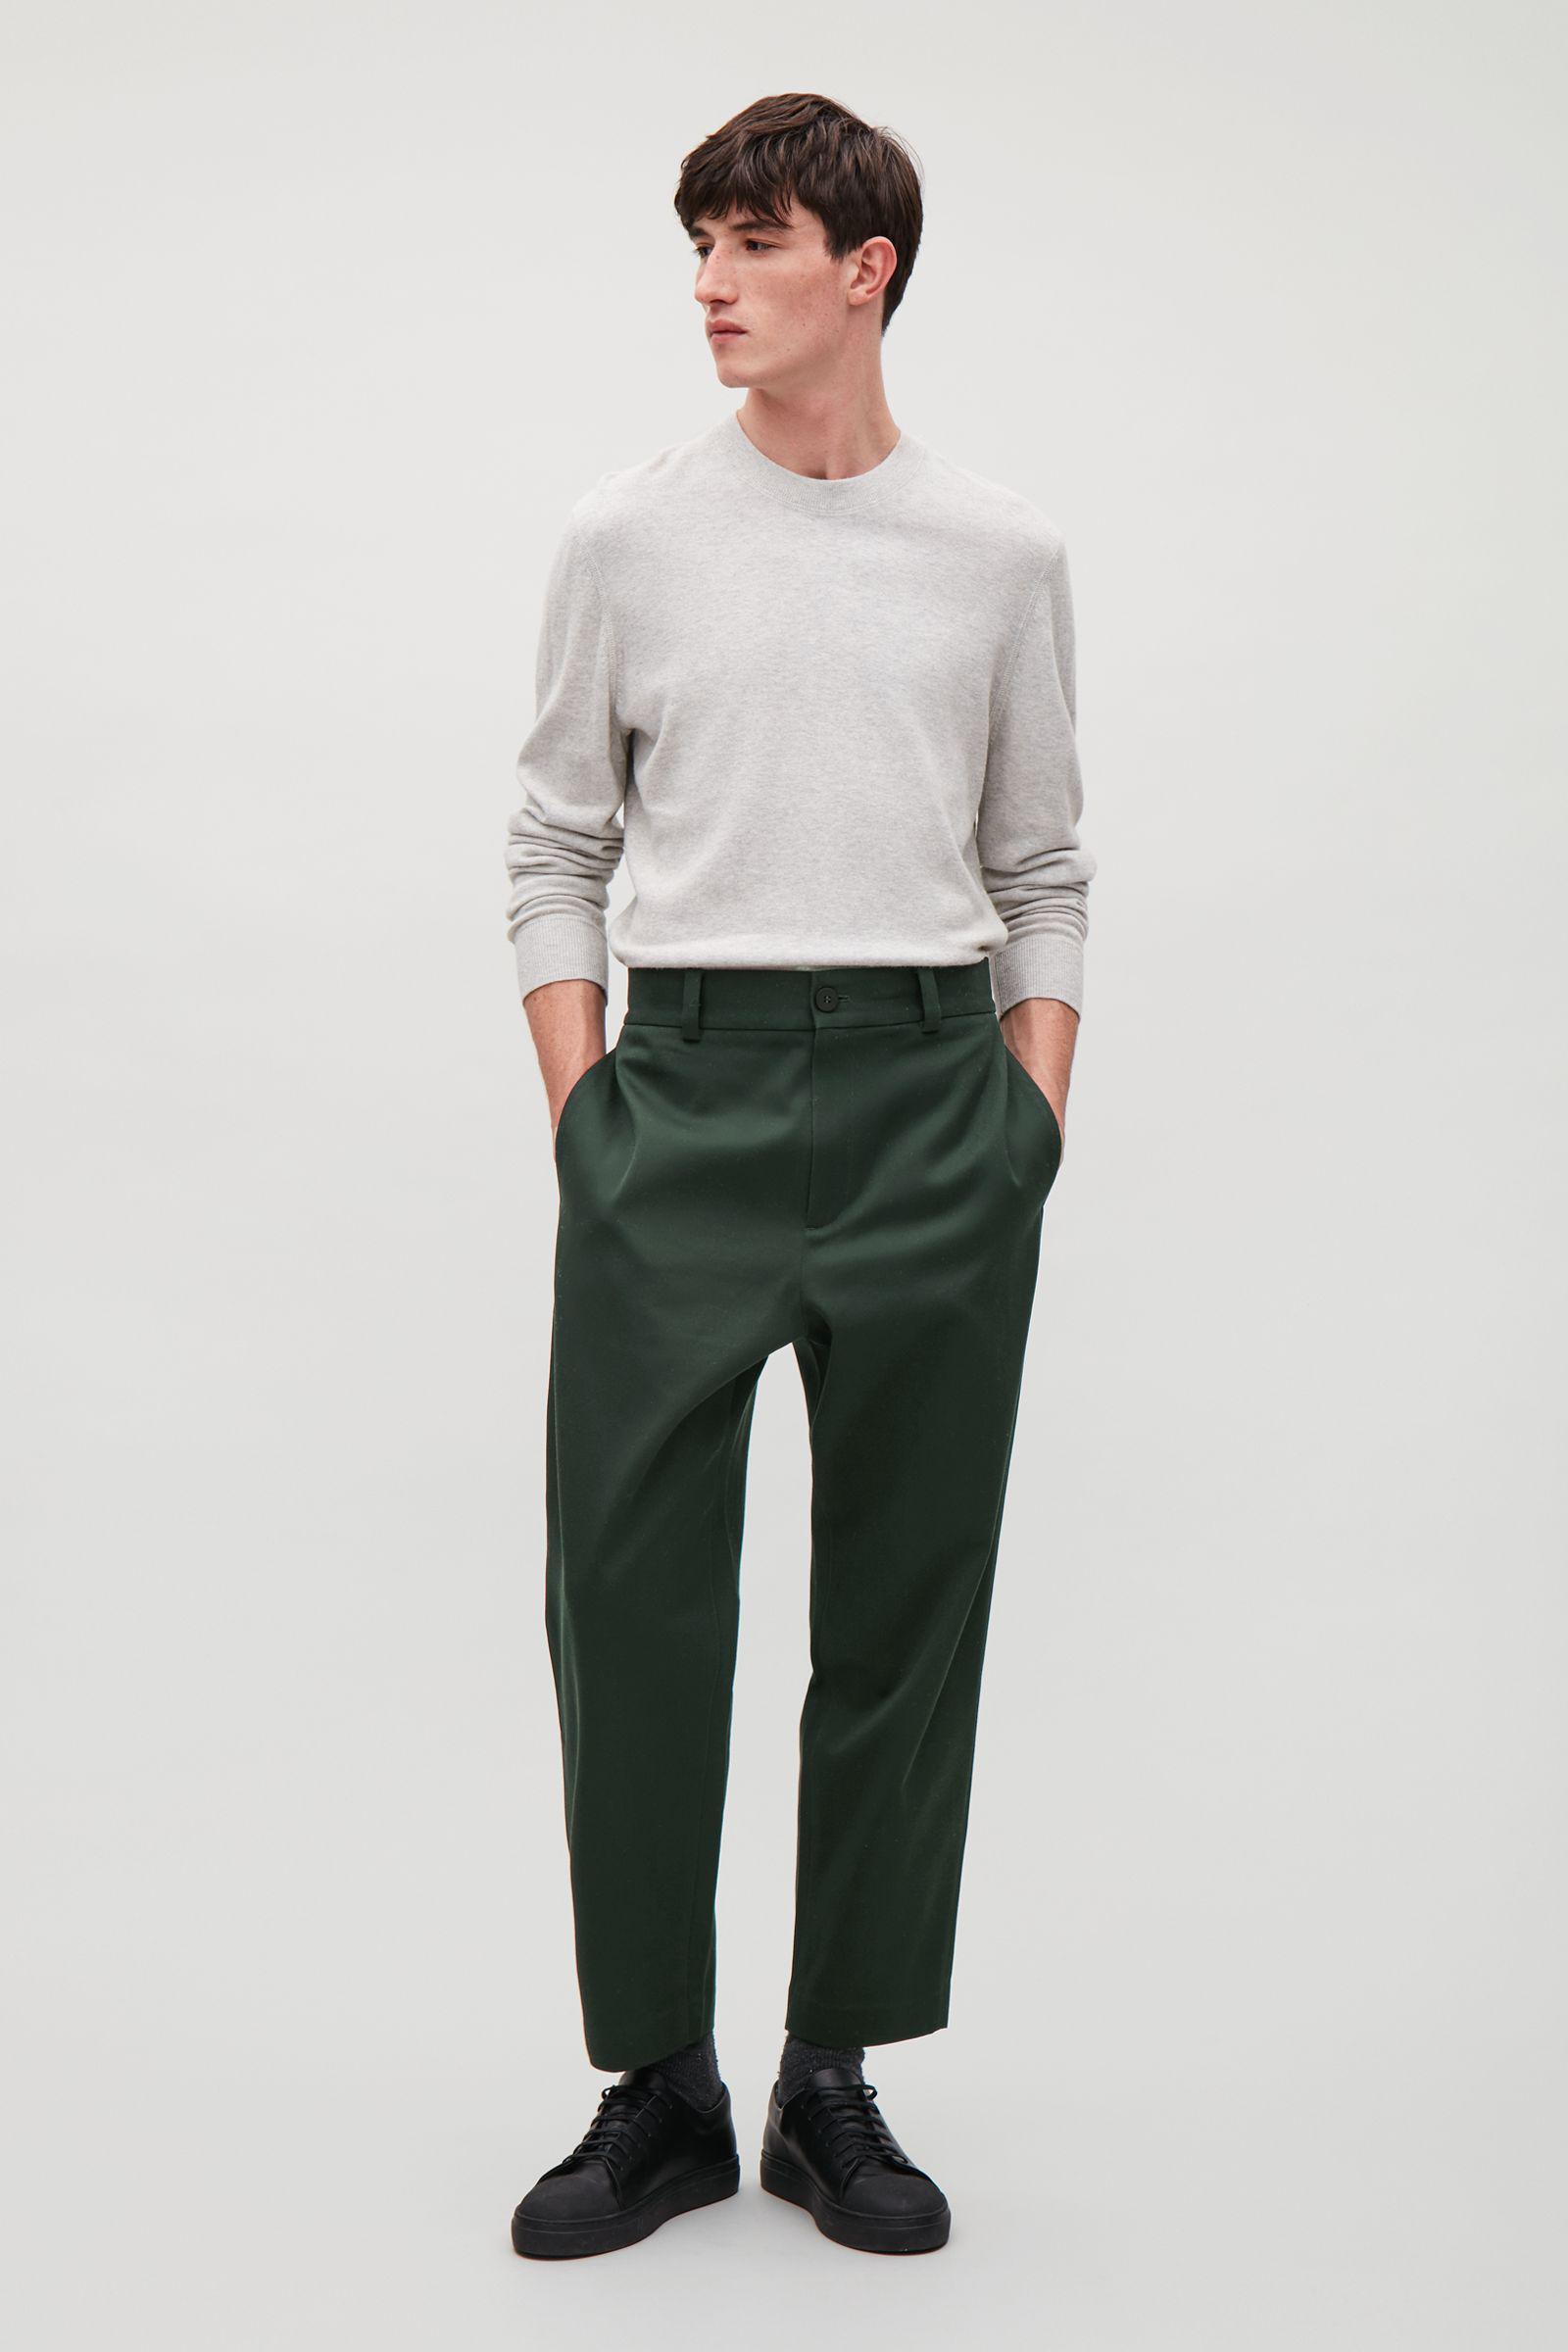 COS Cotton Cropped Wide-leg Trousers in Khaki Green (Green) for Men - Lyst